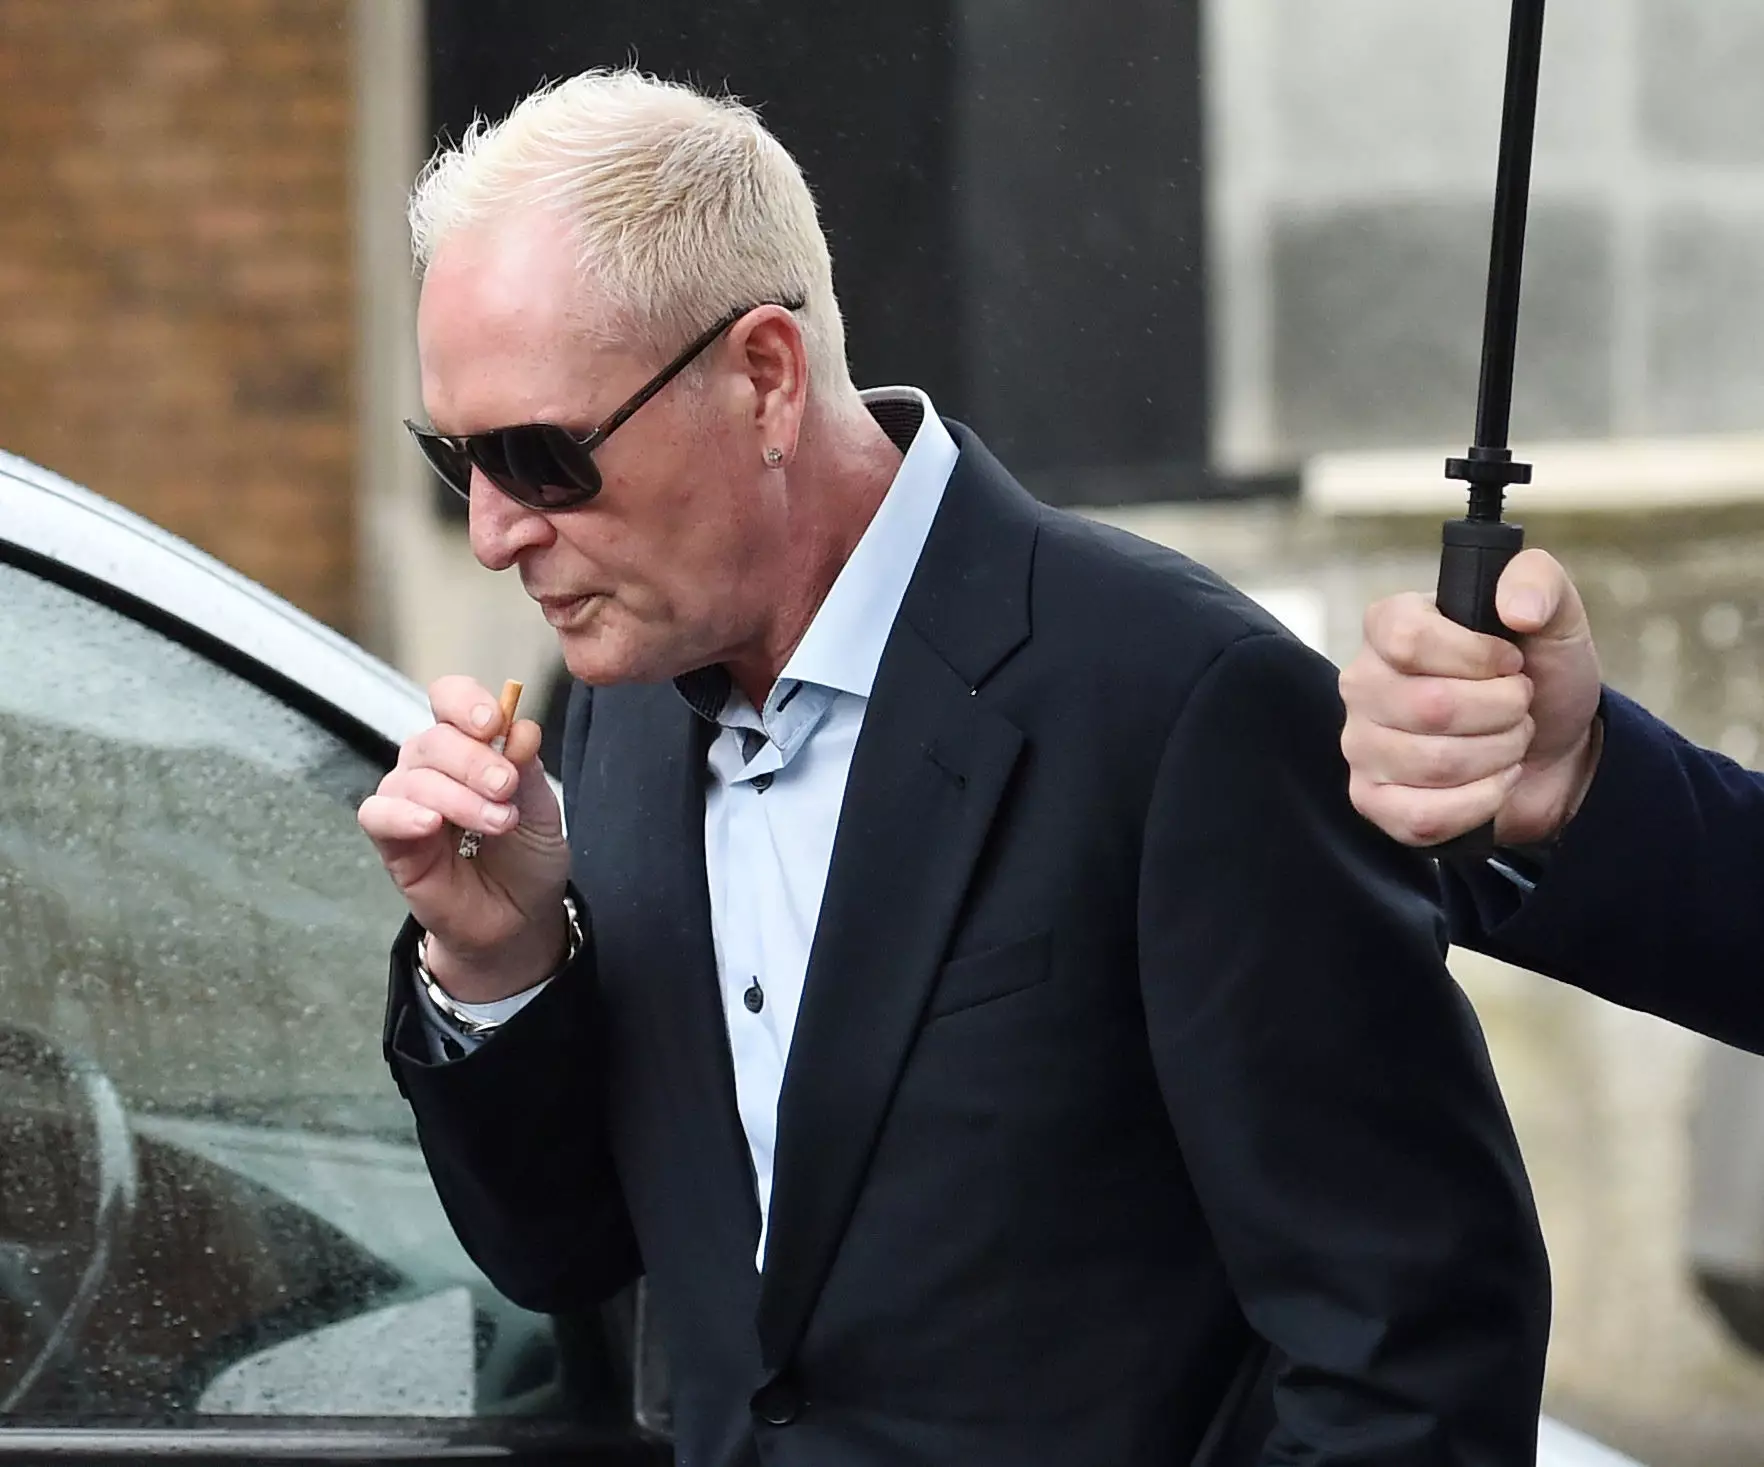 Paul Gascoigne's Court Case Delayed For His Alleged Racist Remarks